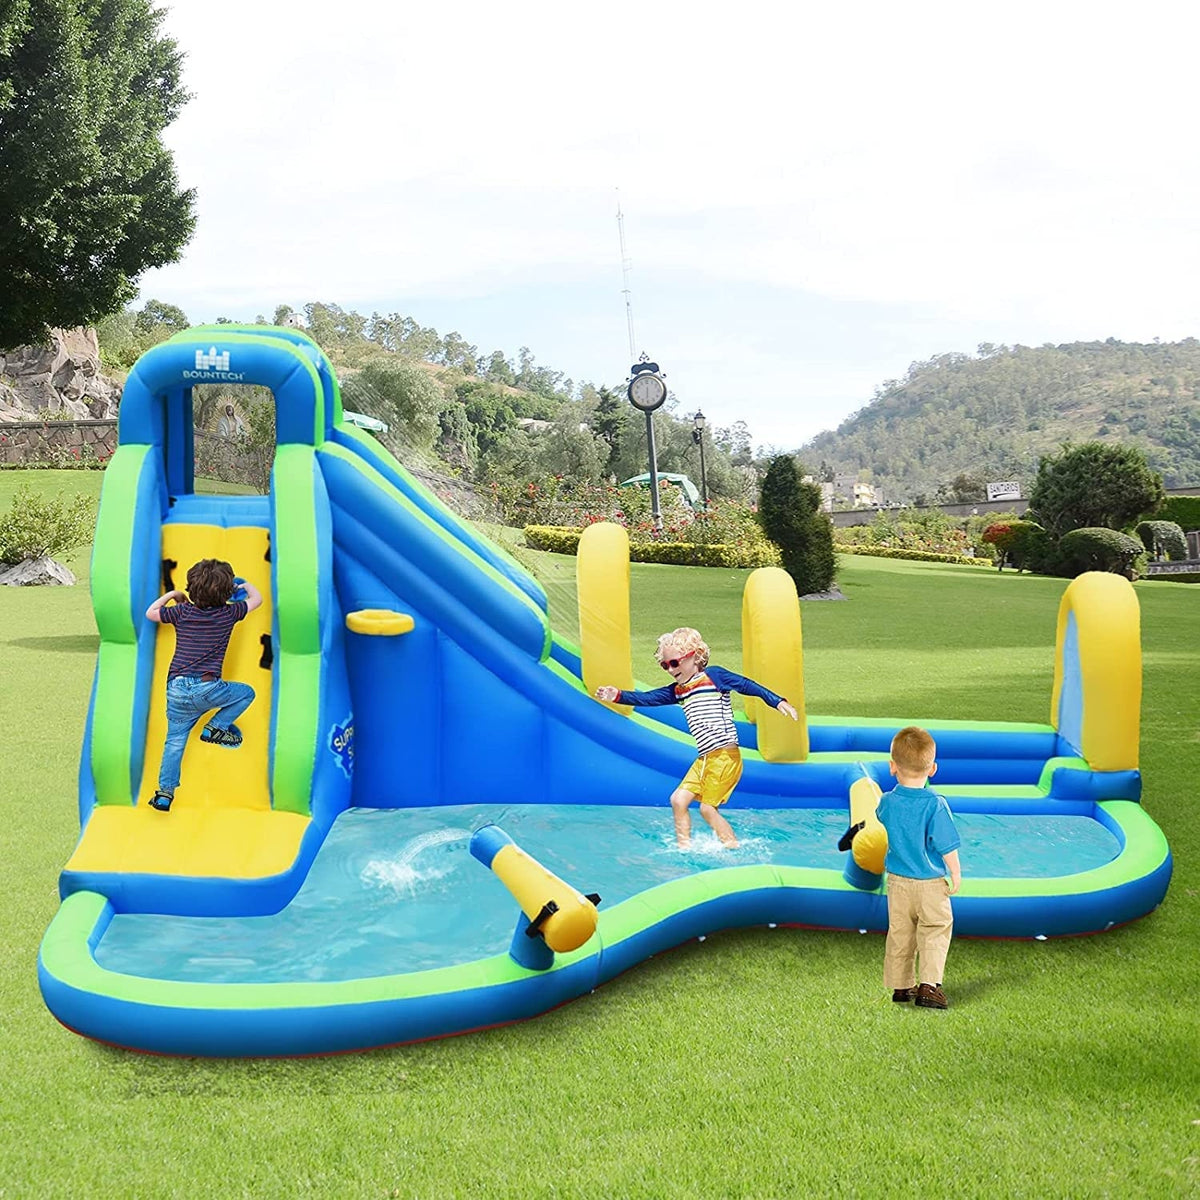 Multifunctional Inflatable Water Slide Bounce with Blower